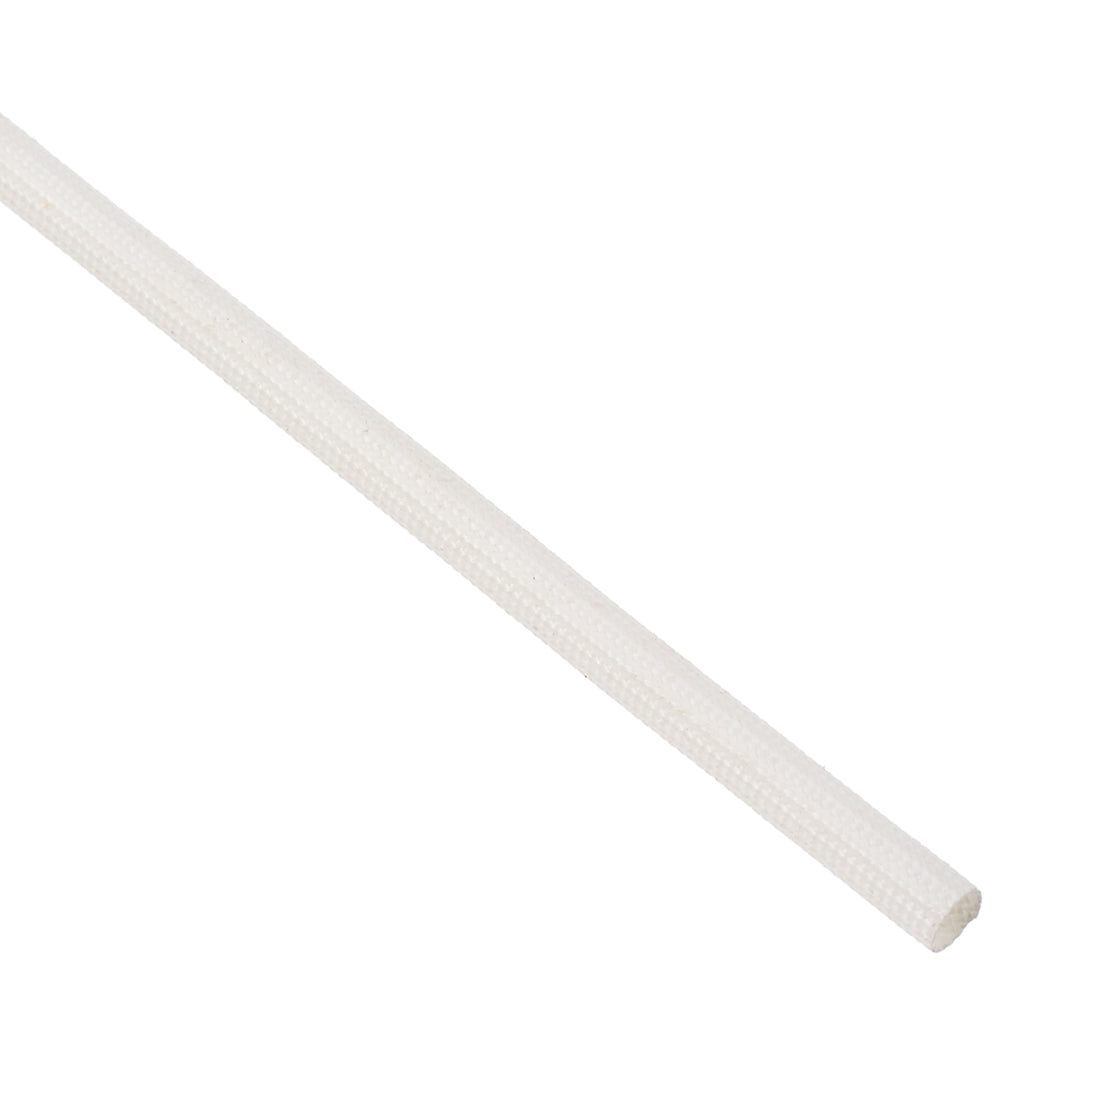 uxcell Uxcell Insulation Cable Protector, 33Ft-5mm High TEMP Silicone Fiberglass Sleeve White